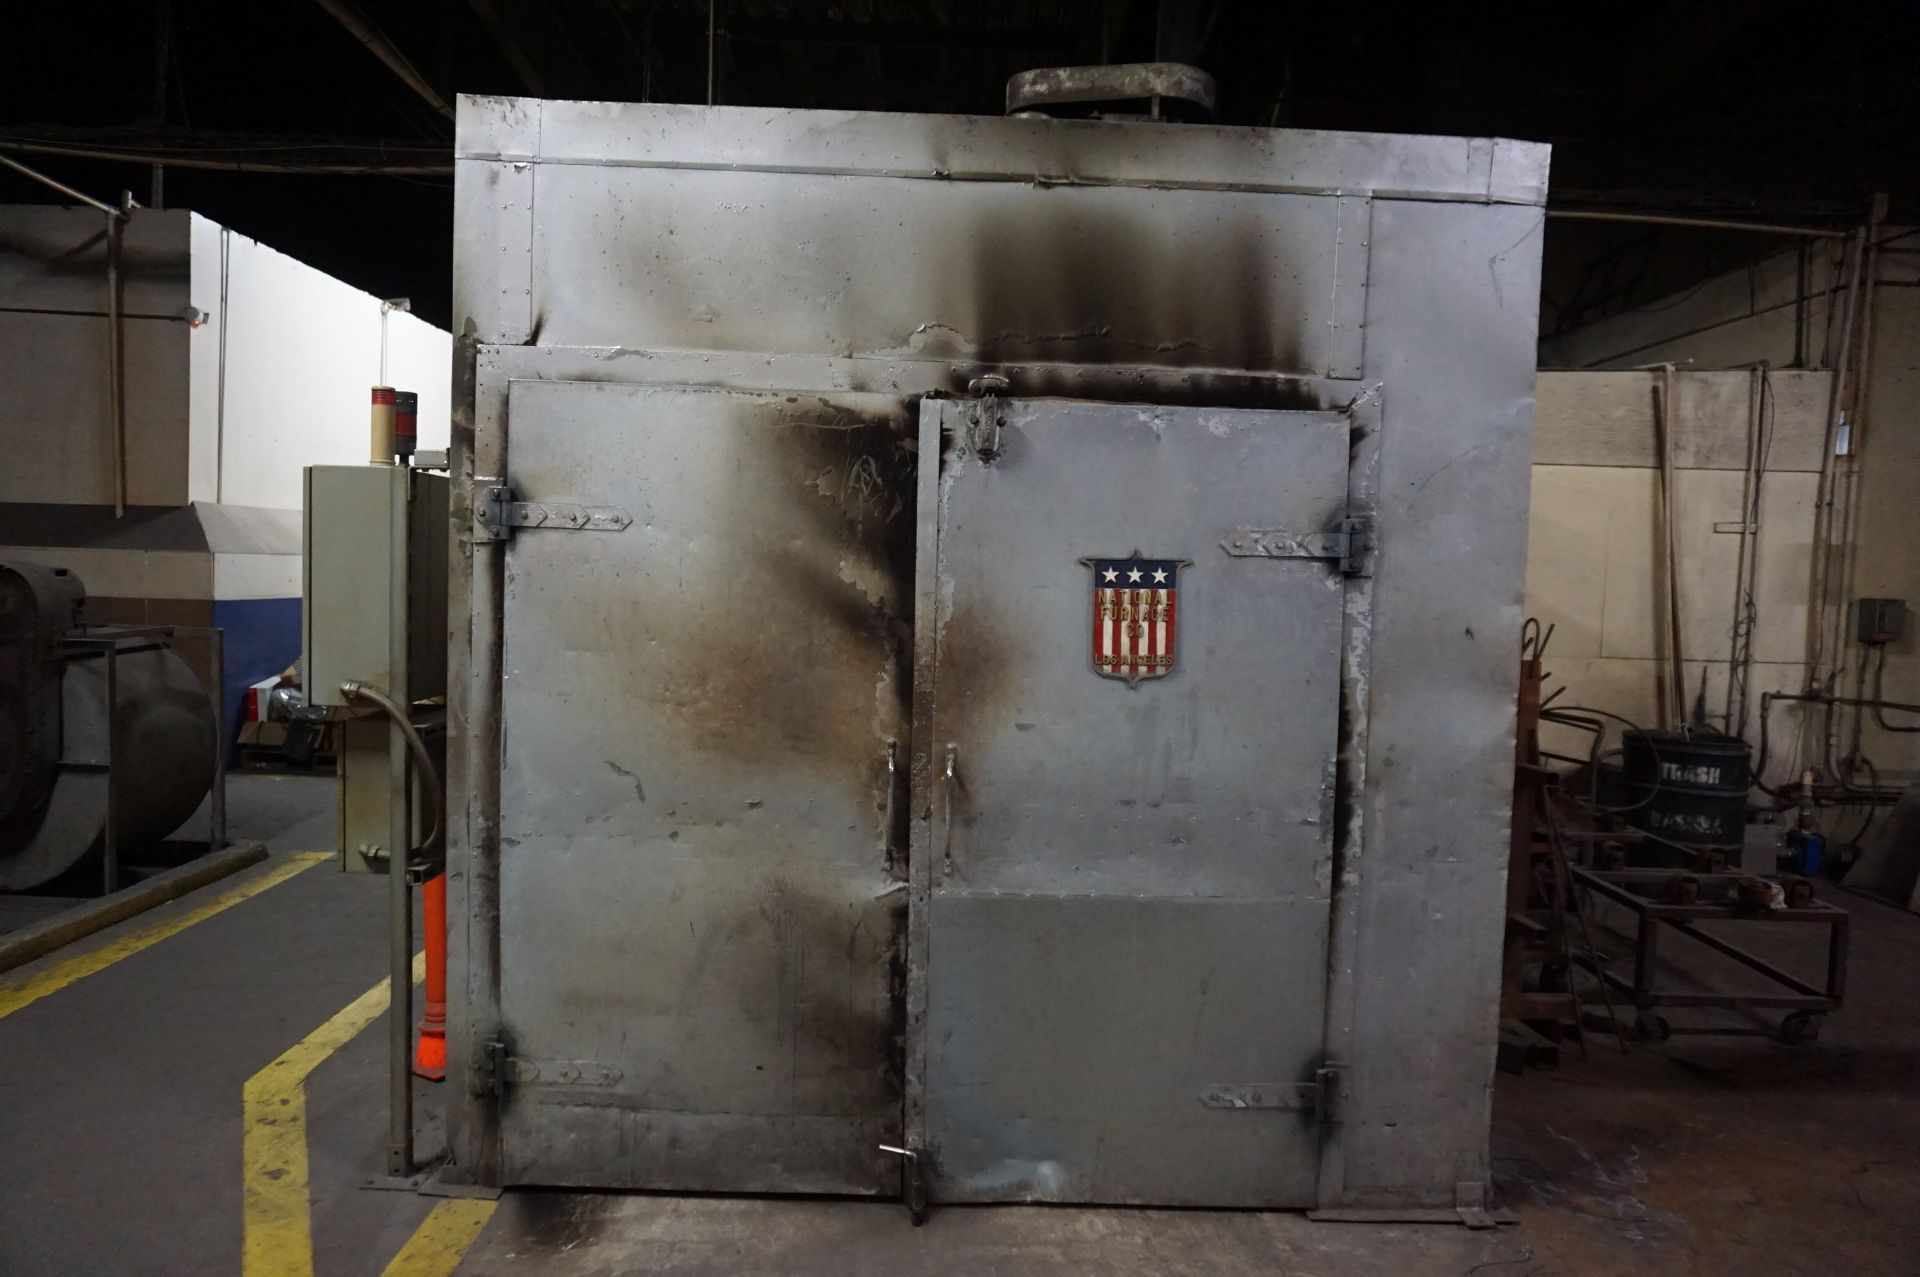 GAS FIRED TWO DOOR WALK IN TYPE FURNACE, 290 - 475 DEGREE F, 48" X 60" X 72", DIGITAL GAUGES, - Image 2 of 6